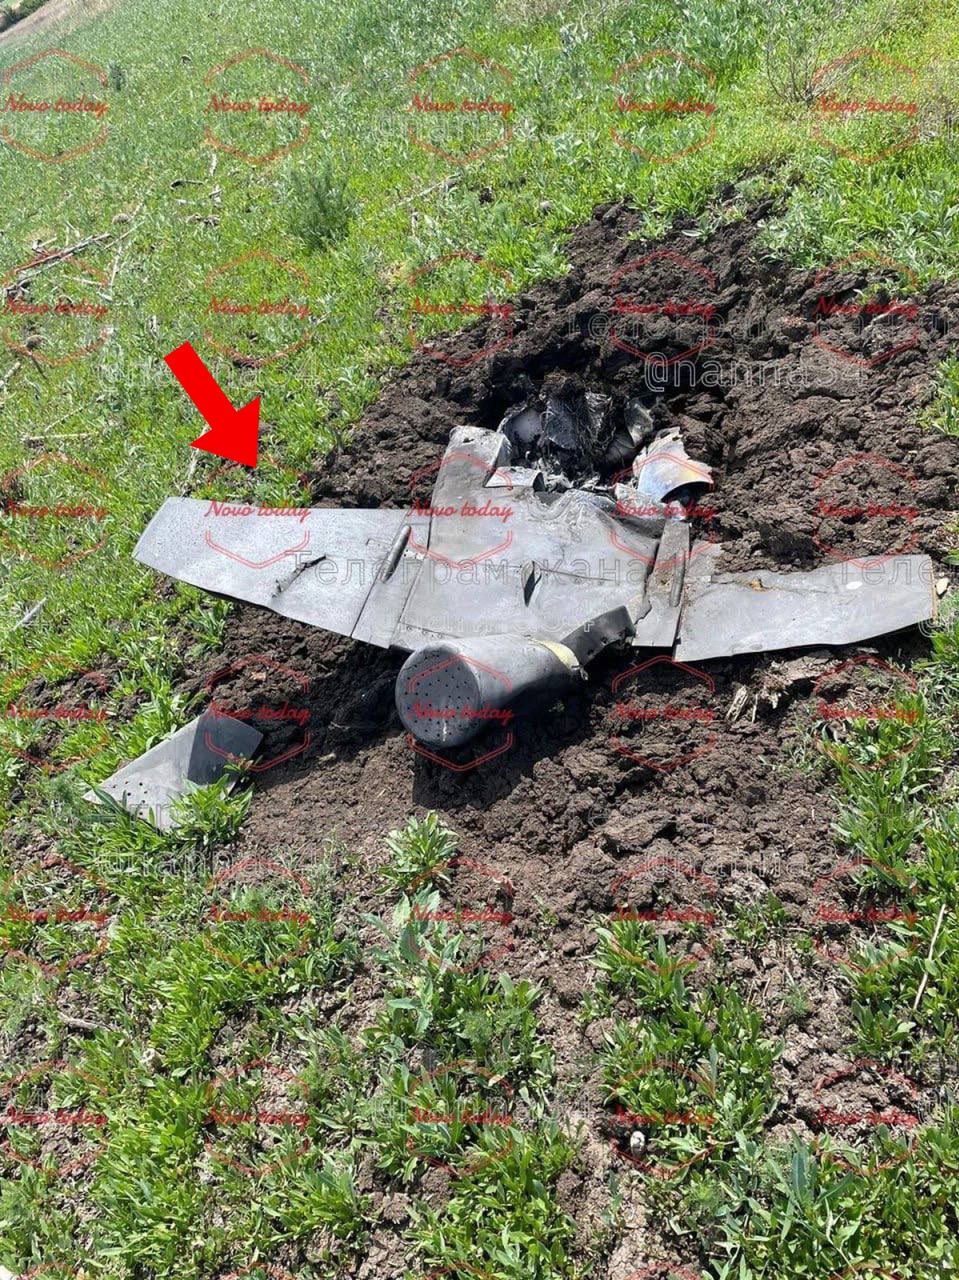 The Ch-101 missile crashed in Russia